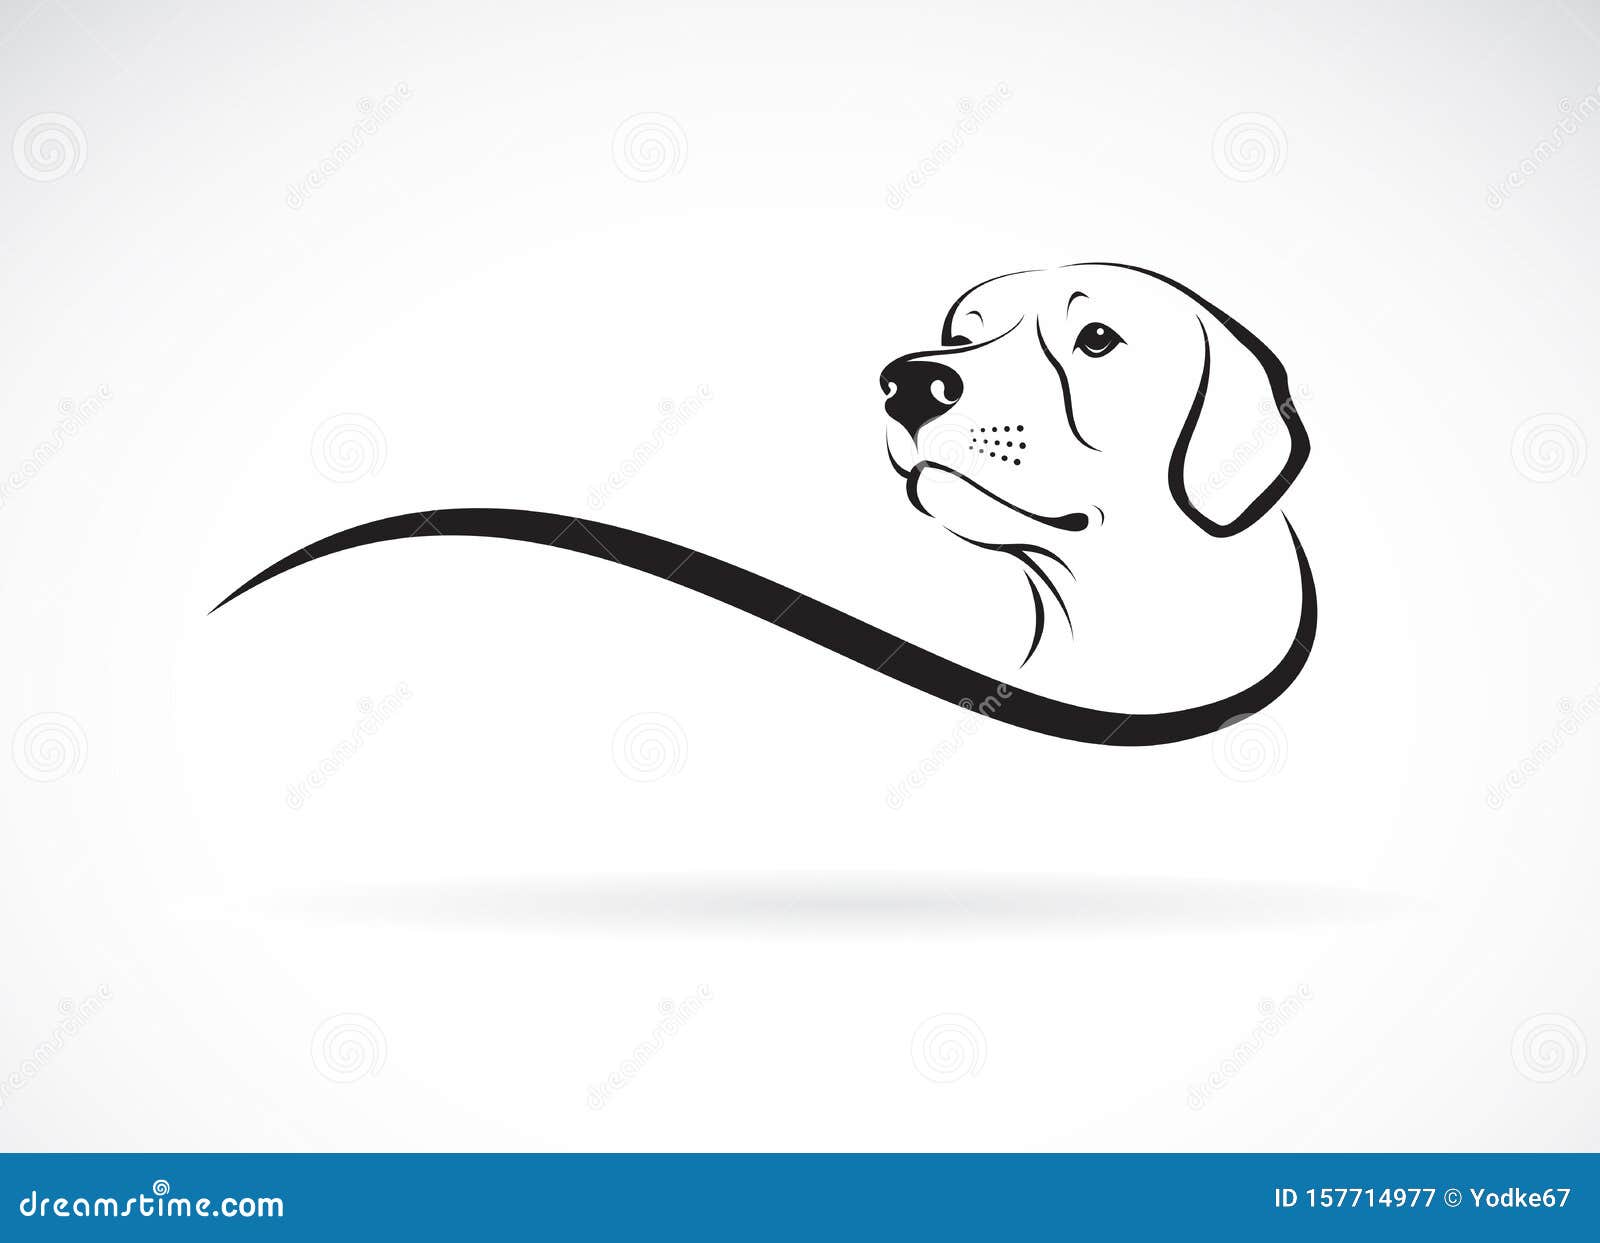 Download Vector Of A Dog Headlabrador Retriever On White Background Pet Animals Dogs Logo Or Icon Easy Editable Layered Vector Stock Vector Illustration Of Cute Face 157714977